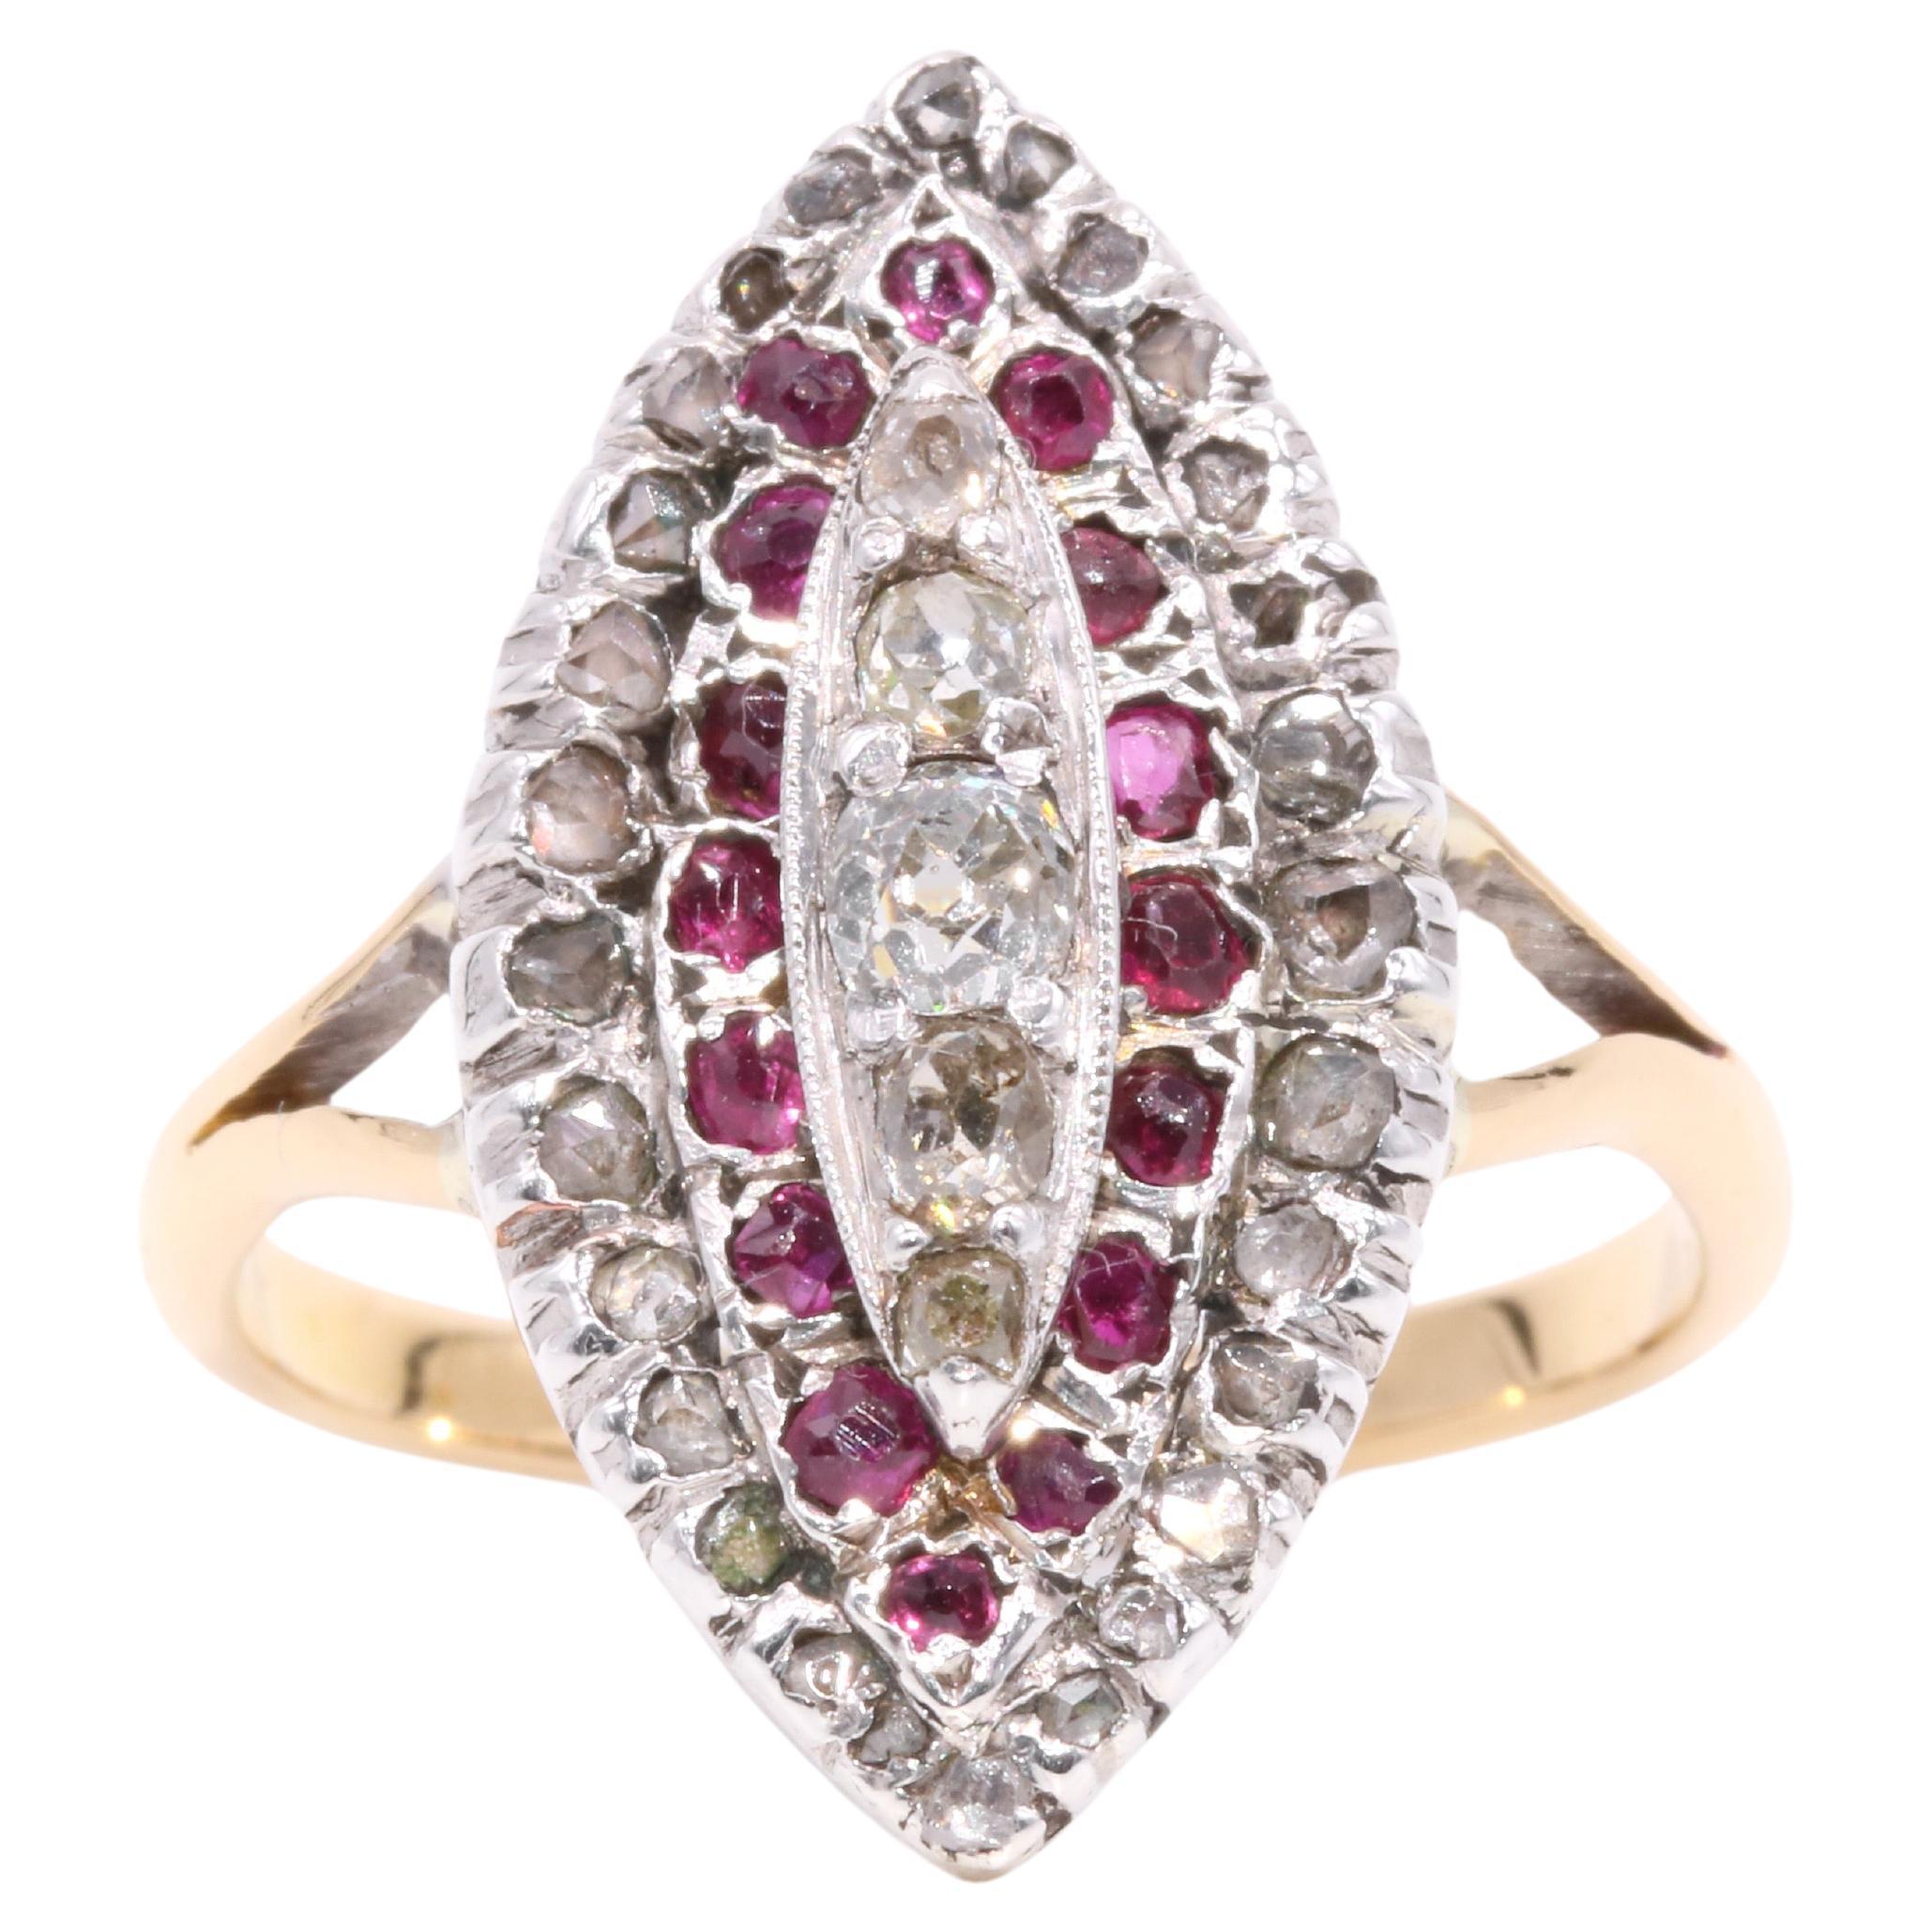 Antique Victorian 18K Gold and Silver 0.8ctw Ruby and Diamond Marquise Ring